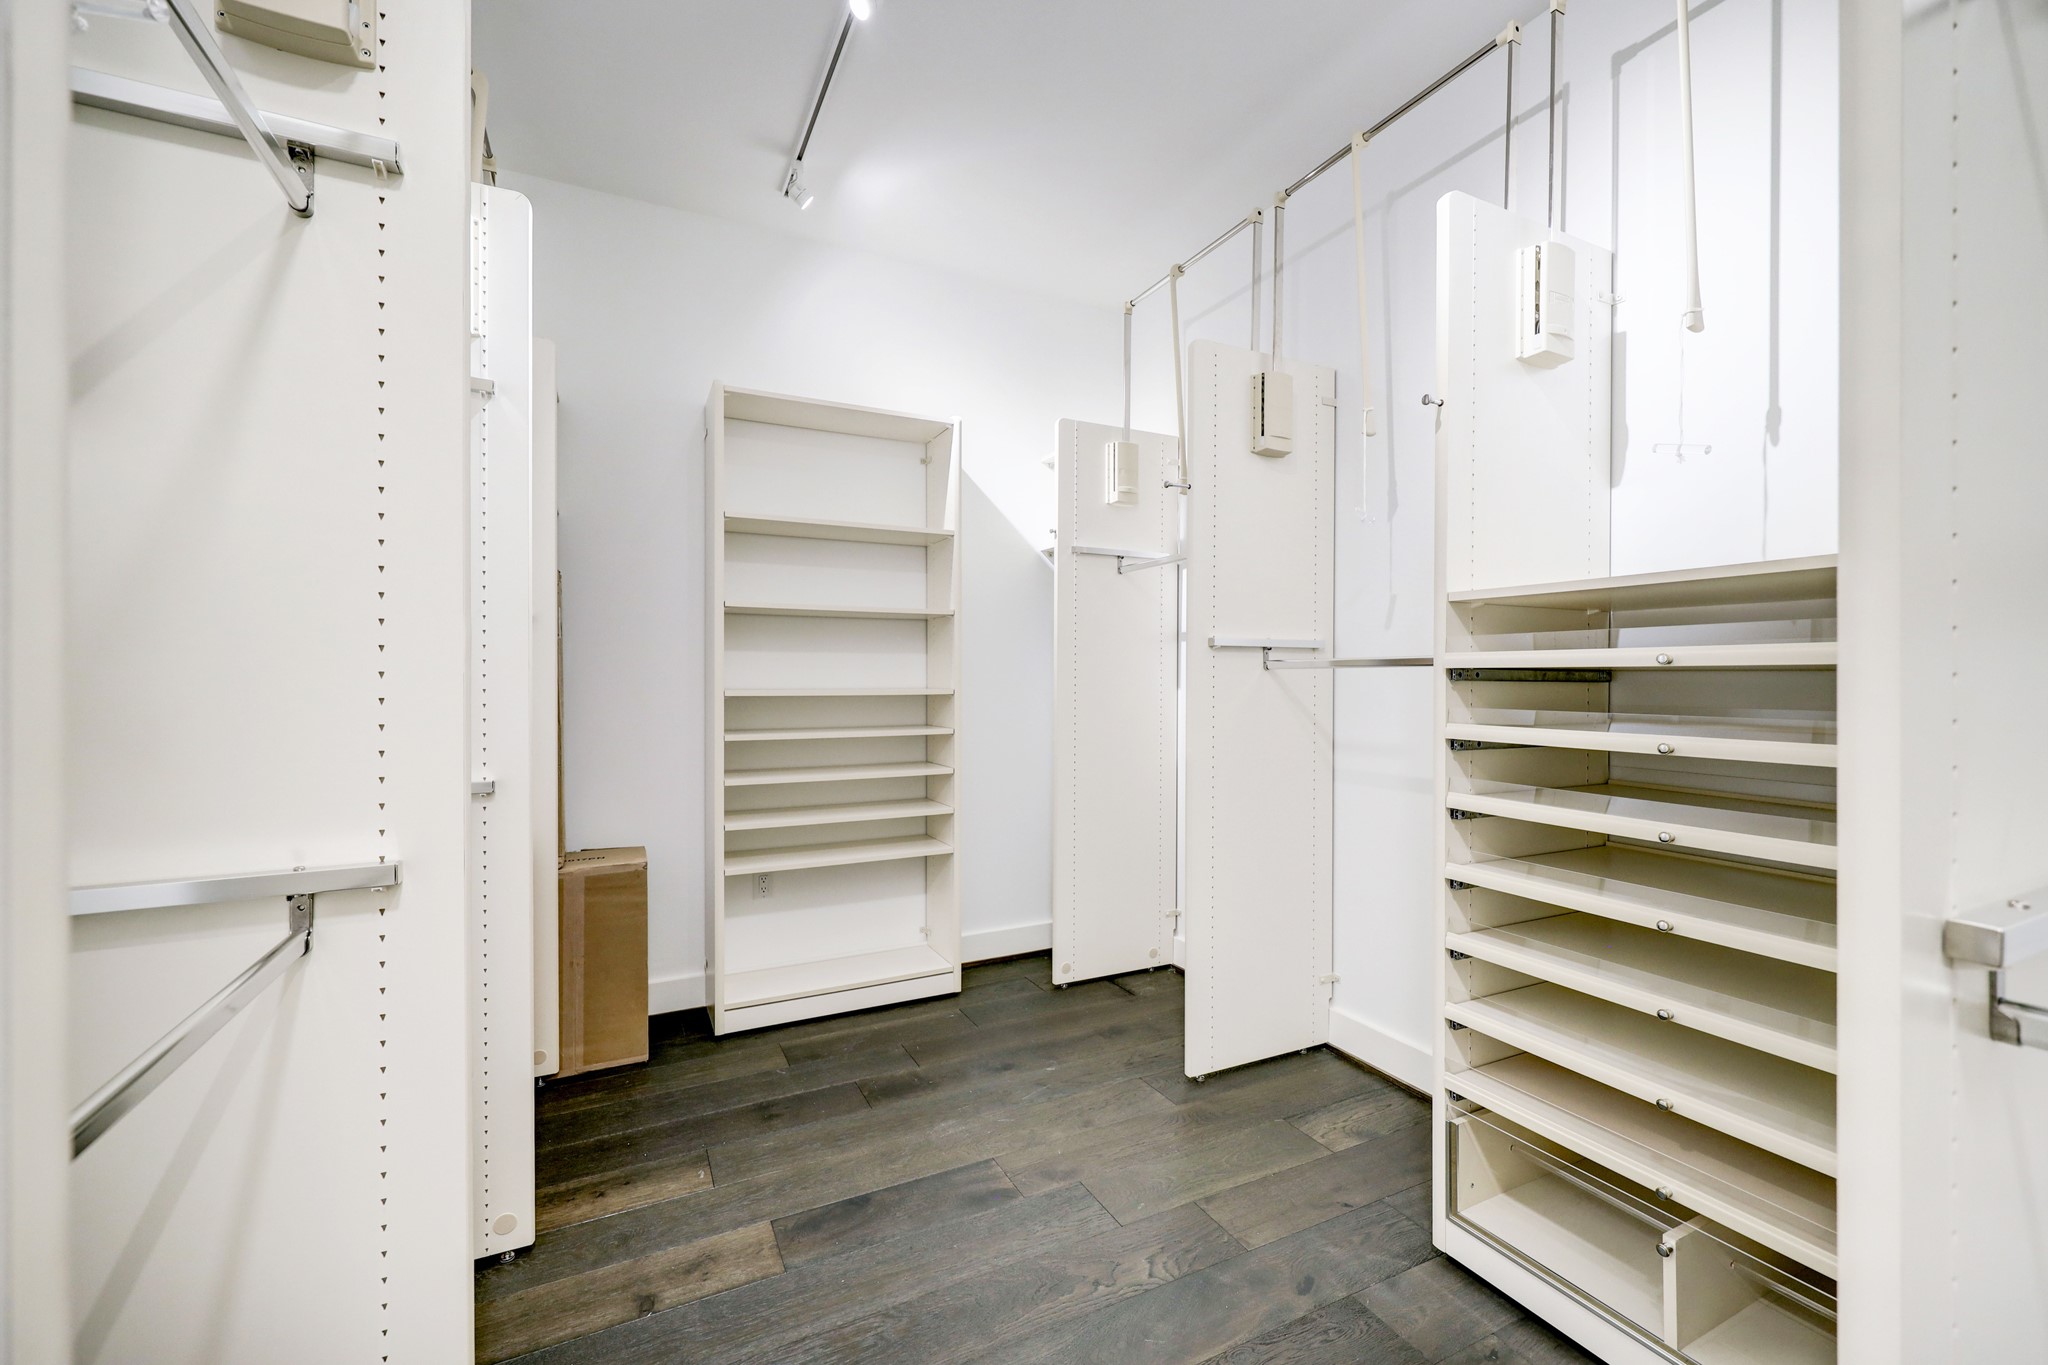 Another component of the primary suite is the Programme Martin closet. Keep it as is or work with Programme Martin to customize it for your needs.